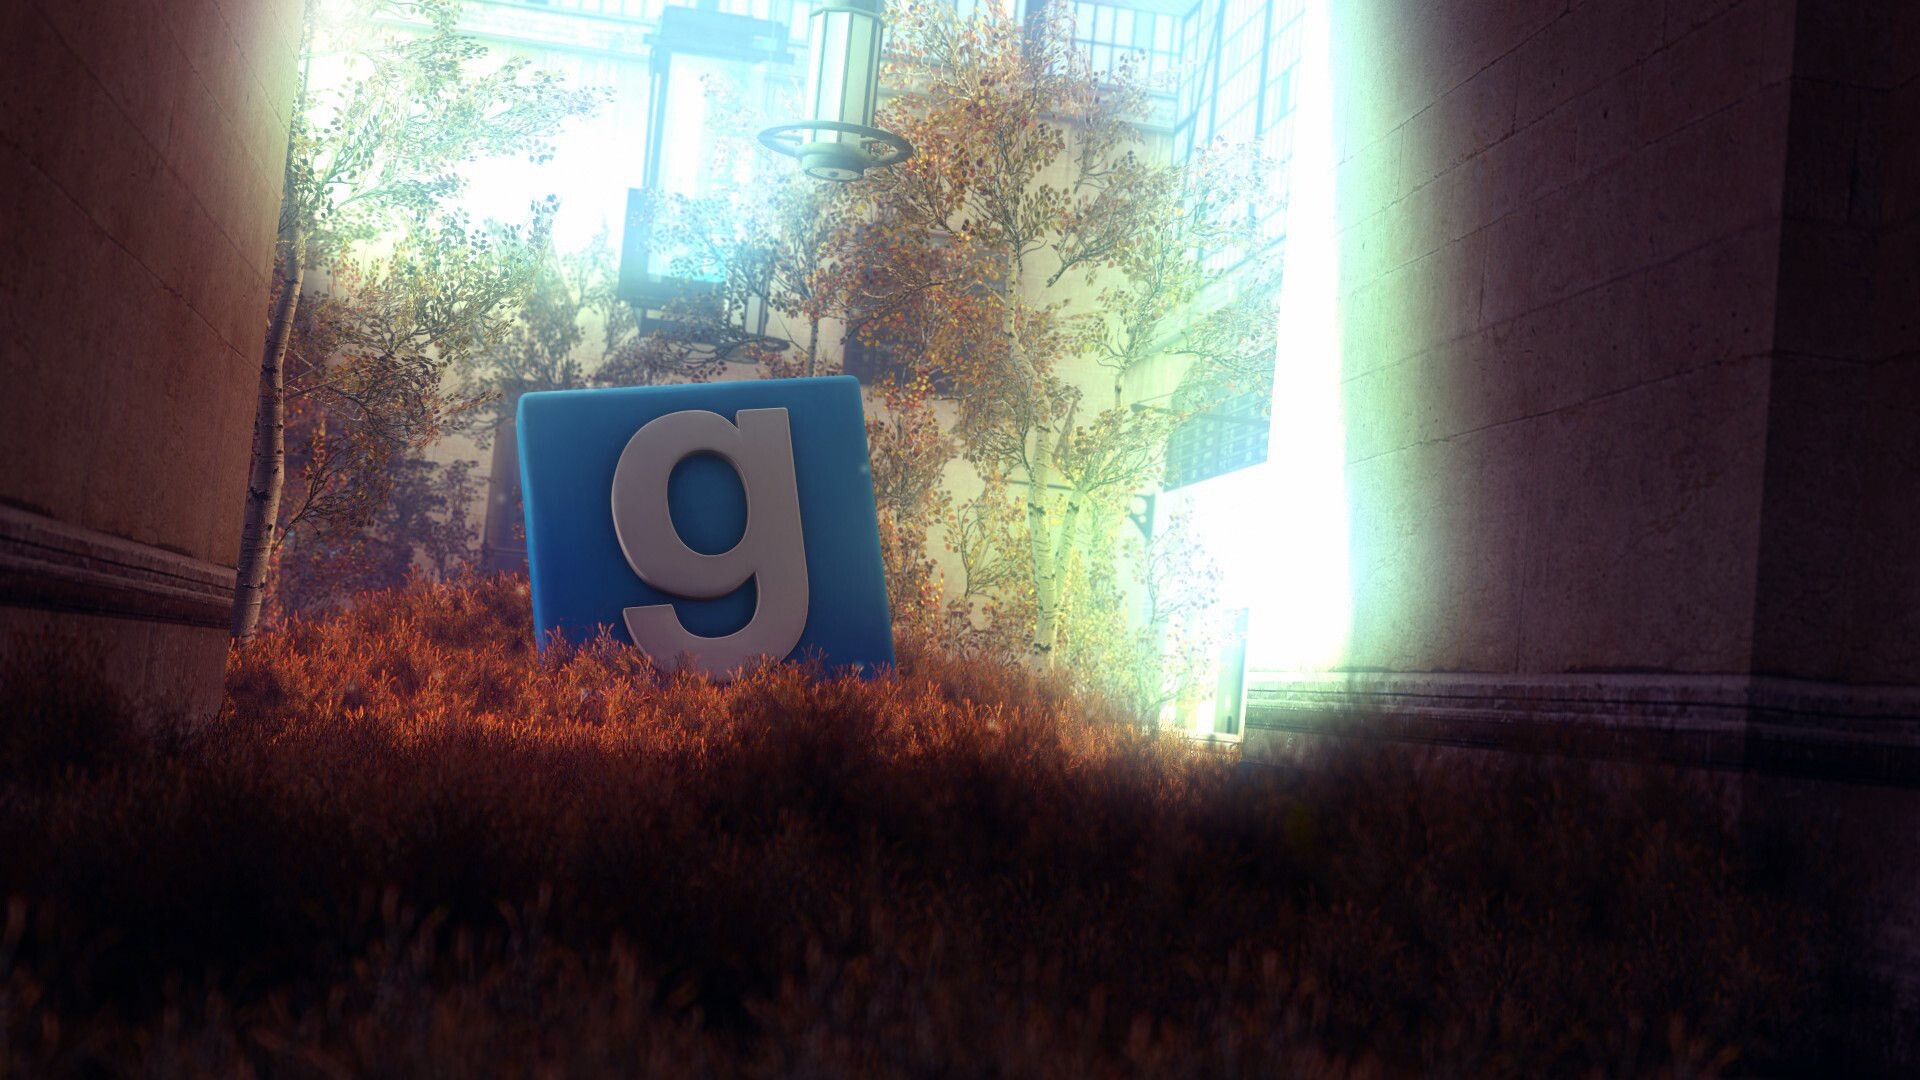 Garry's Mod: The G box at the White Forest military base, Half-Life 2: Episode 2, Fanmade modification. 1920x1080 Full HD Background.